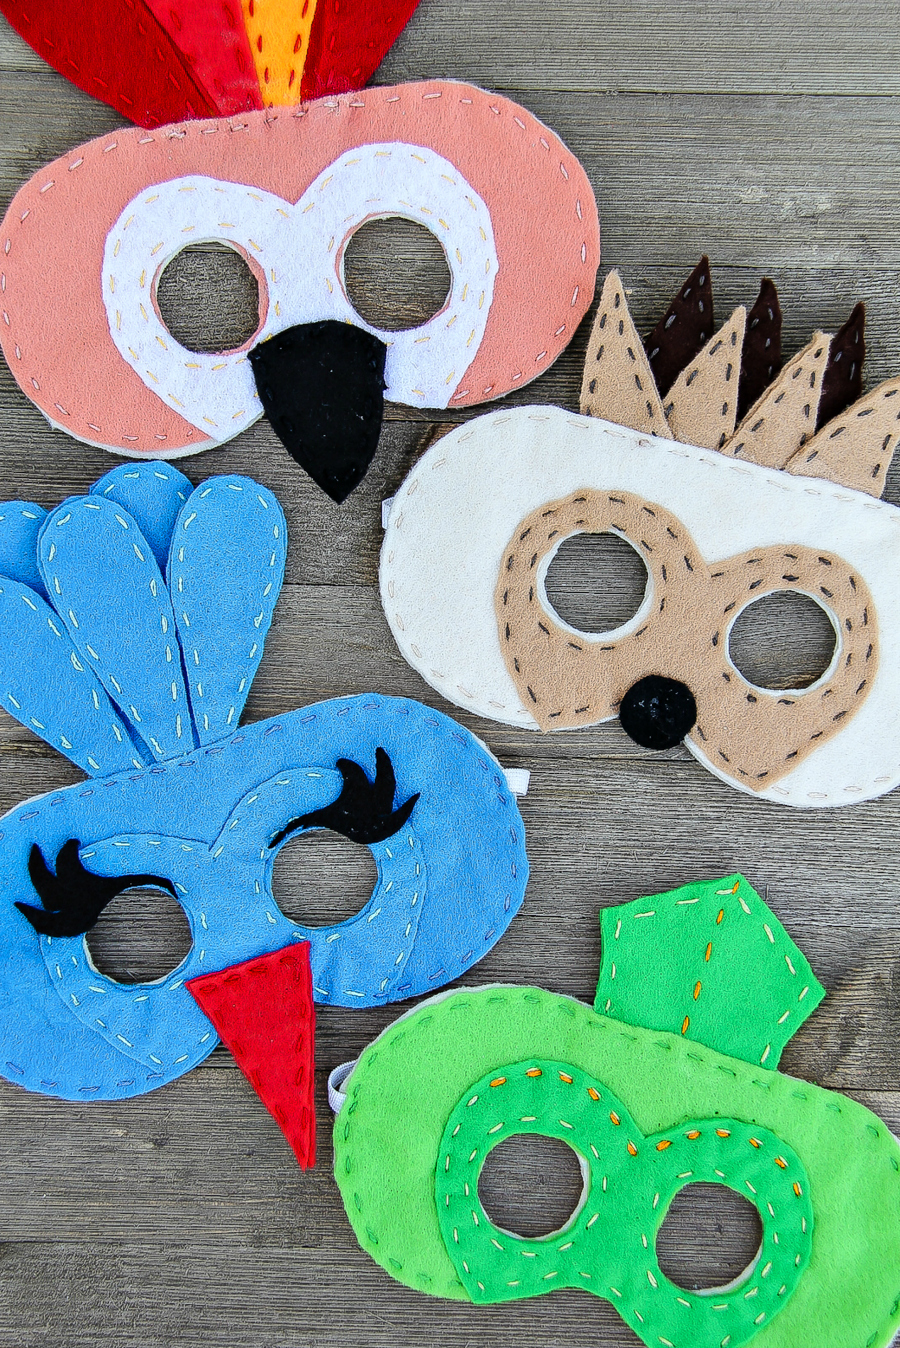 get wild with these homemade felt masks inspired by the Wild Life movie.